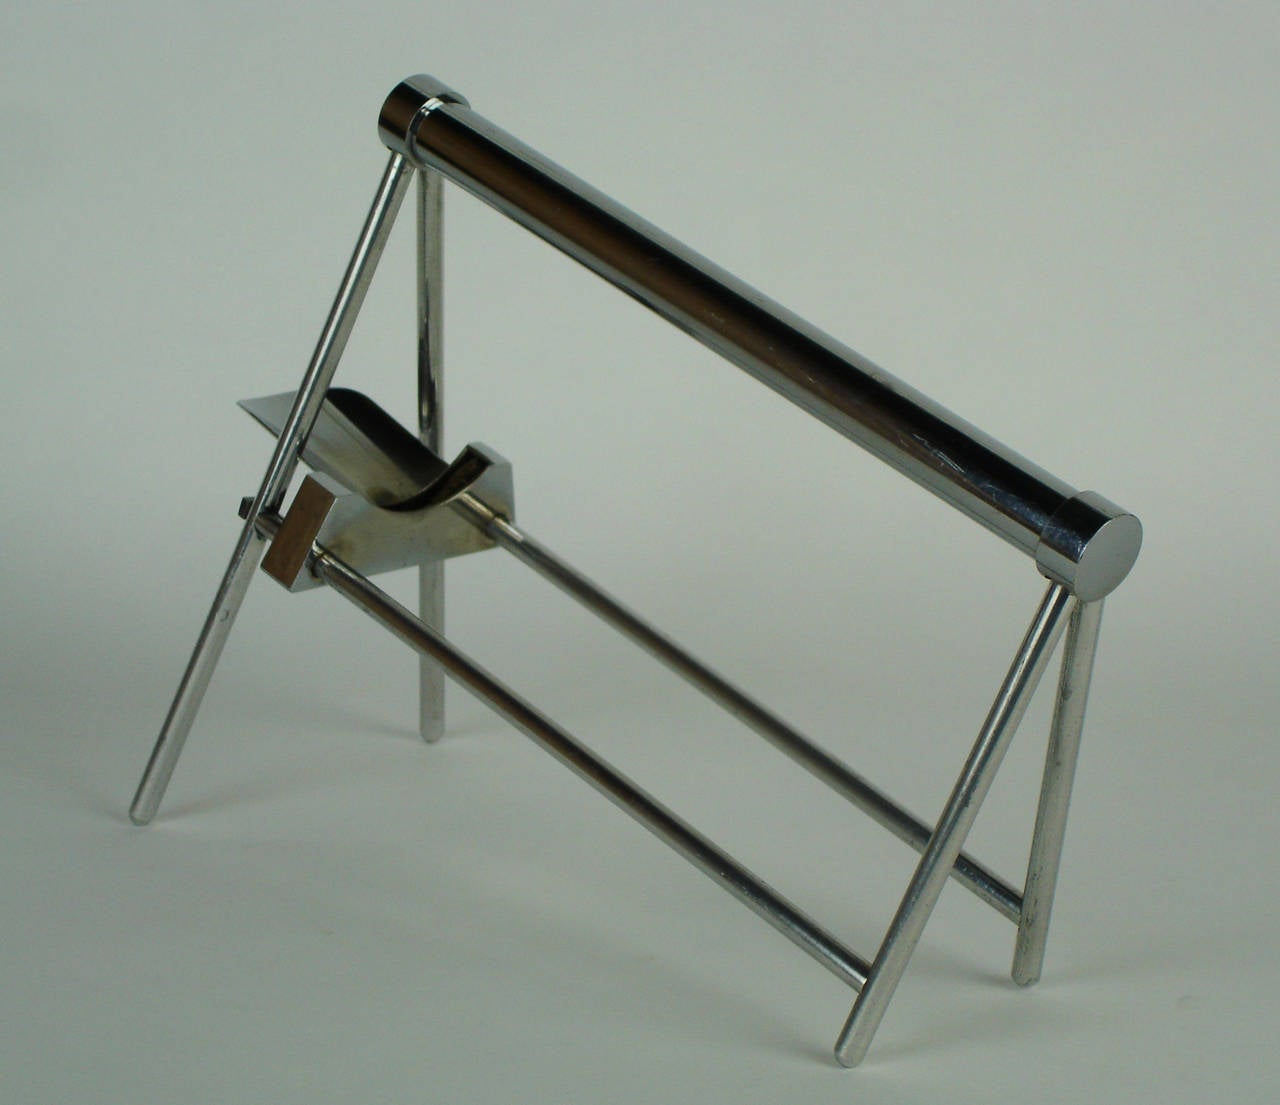 A chromed metal wine server with a modernist design of the 1930s. This model is designed by Jacques Adnet.